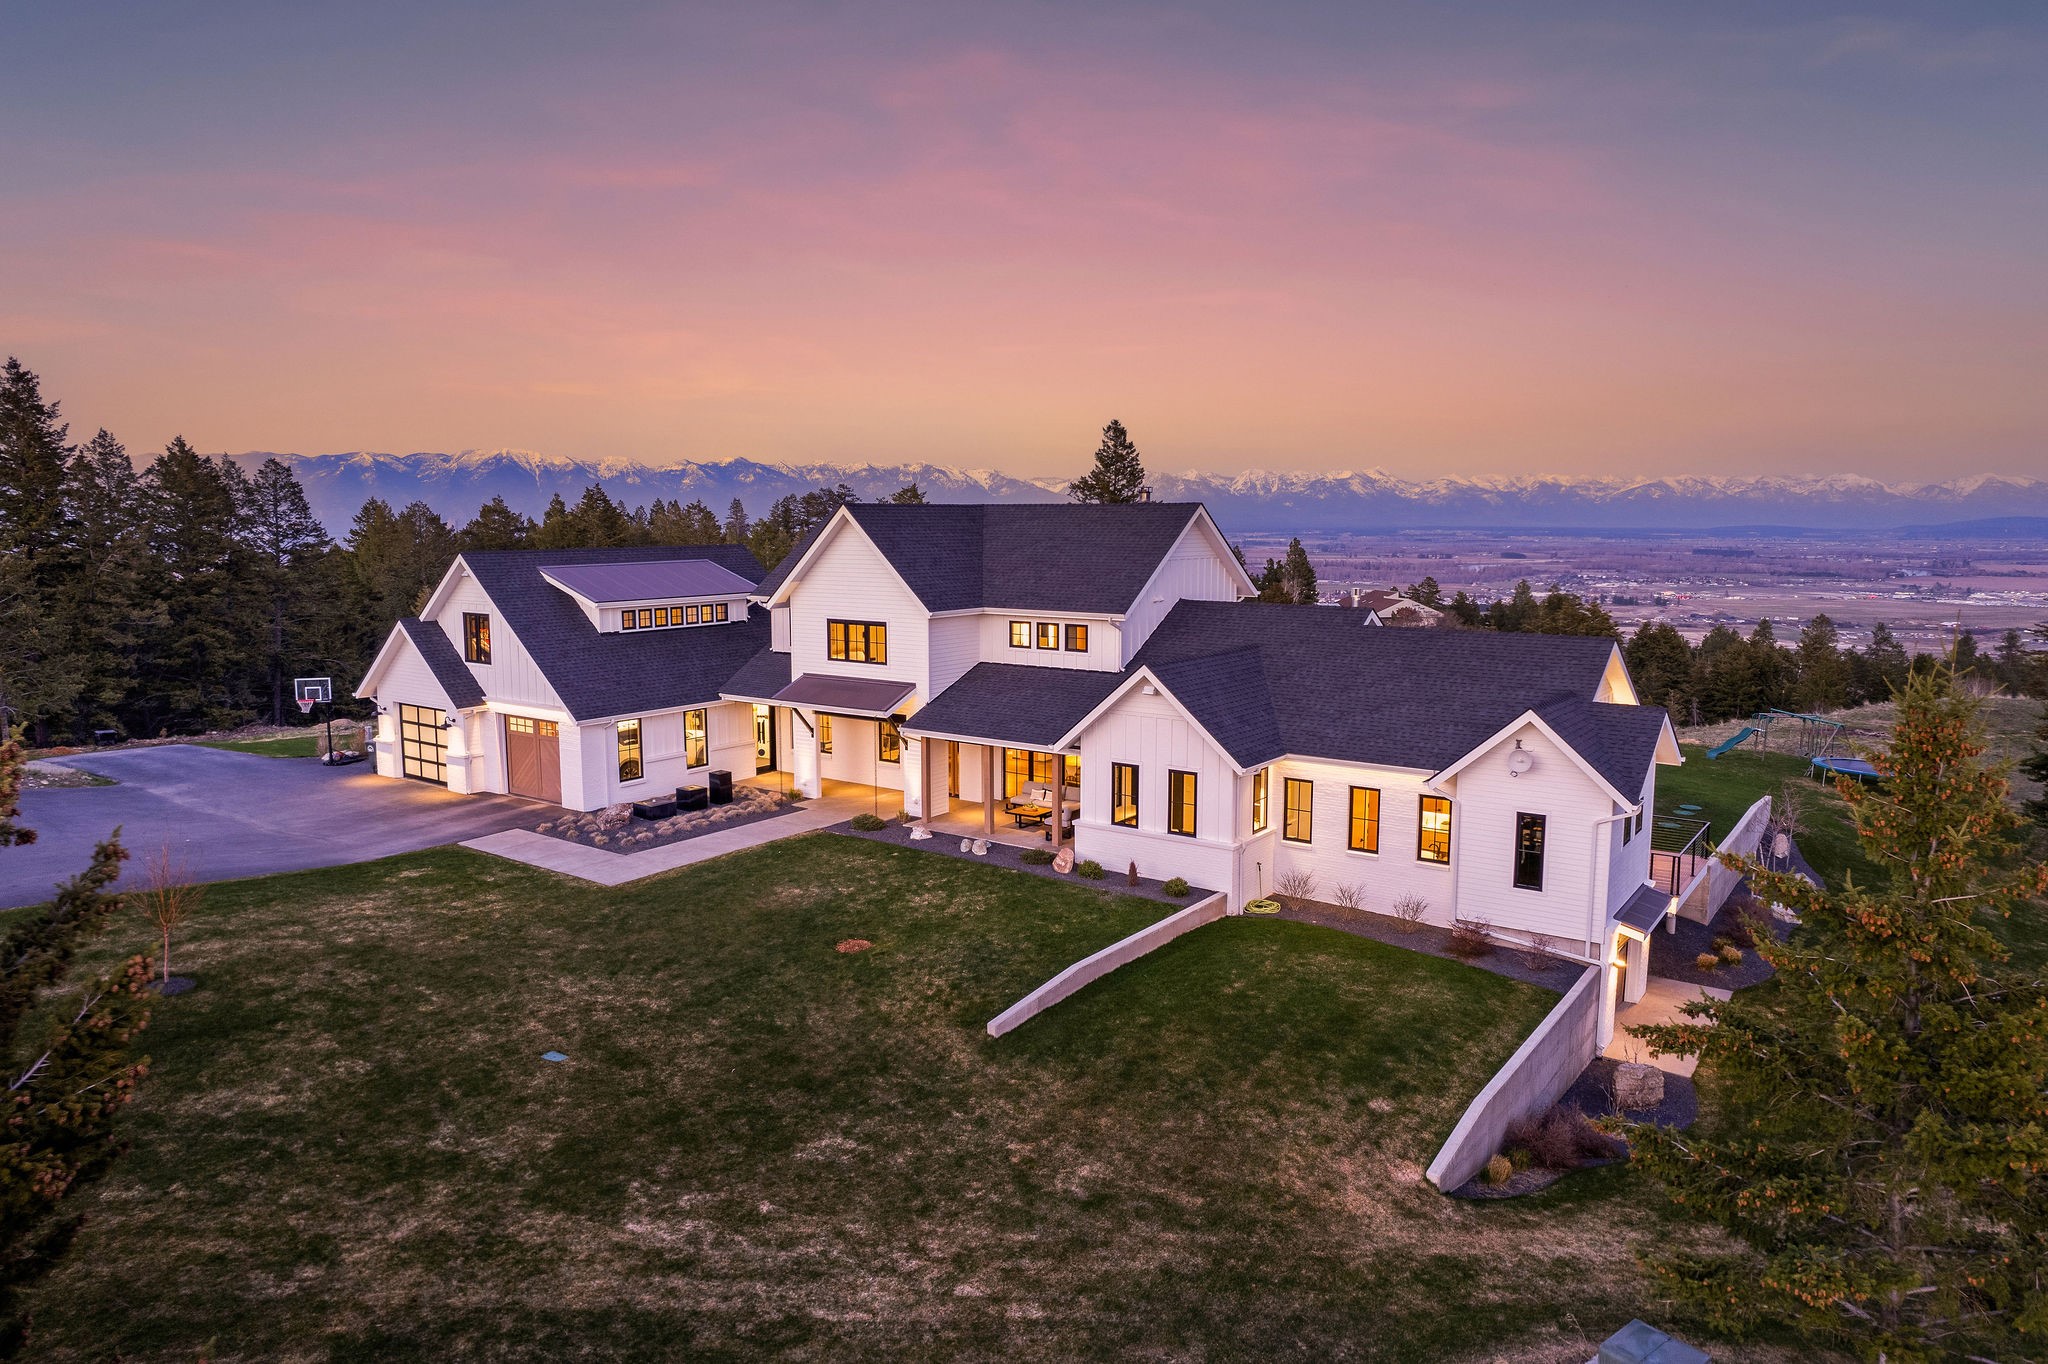 Welcome to 211 Lone Pine Road, a true legacy property! Pristine architecture with one of the most iconic backdrops in the Flathead Valley. This property sits on 9.35 acres of rolling unspoiled landscape, keeping the property private but still allowing 360 views from every corner of the home. 4,460 SF, 4 bed, 4.5 bath mountain modern design with floor to ceiling glass windows & doors throughout, bonus room, oversized 2+ garage, open living space on the main floor, exposed steel beams, vaulted ceilings & wood fireplace. Generously sized kitchen with large fridge, corner pantry, central island & quartz countertops. Luxury master suite on main floor with a fireplace, private balcony, walk-in shower & soaking tub, tile floors, and walk in closet. Home also has an indoor sauna, an outdoor hot tub, & full RV hookup site. Stunning outdoor patio space overlooking the valley views. Property boarders Lone Pine State Park consisting of 279 recreational acres. Offered at $3,745,000.